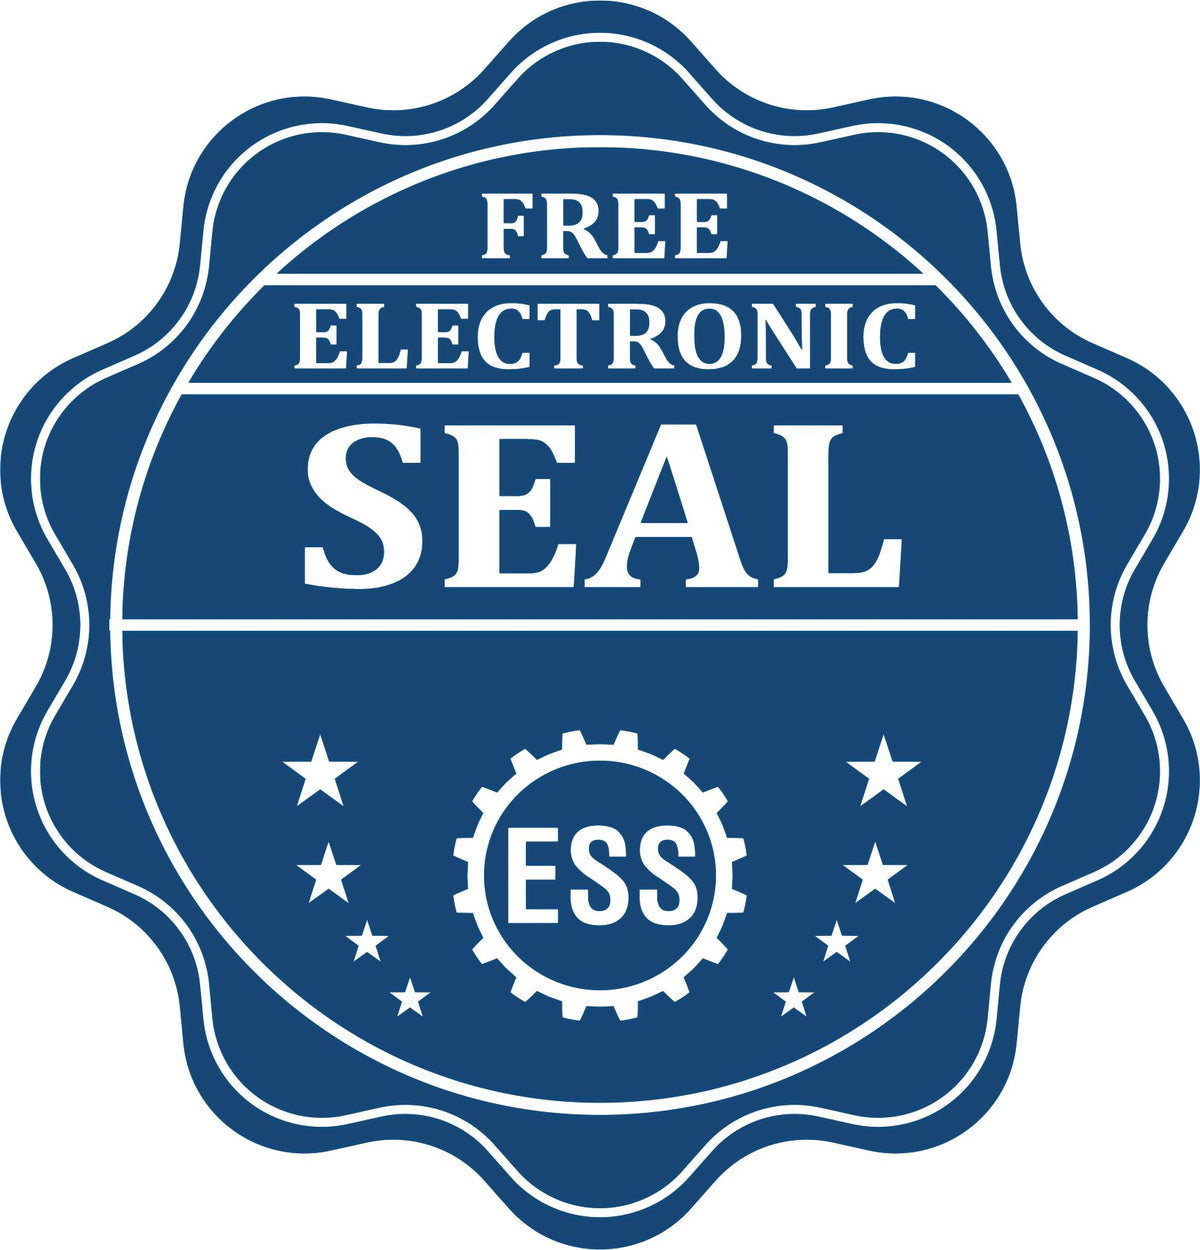 A badge showing a free electronic seal for the Slim Pre-Inked Colorado Professional Geologist Seal Stamp with stars and the ESS gear on the emblem.